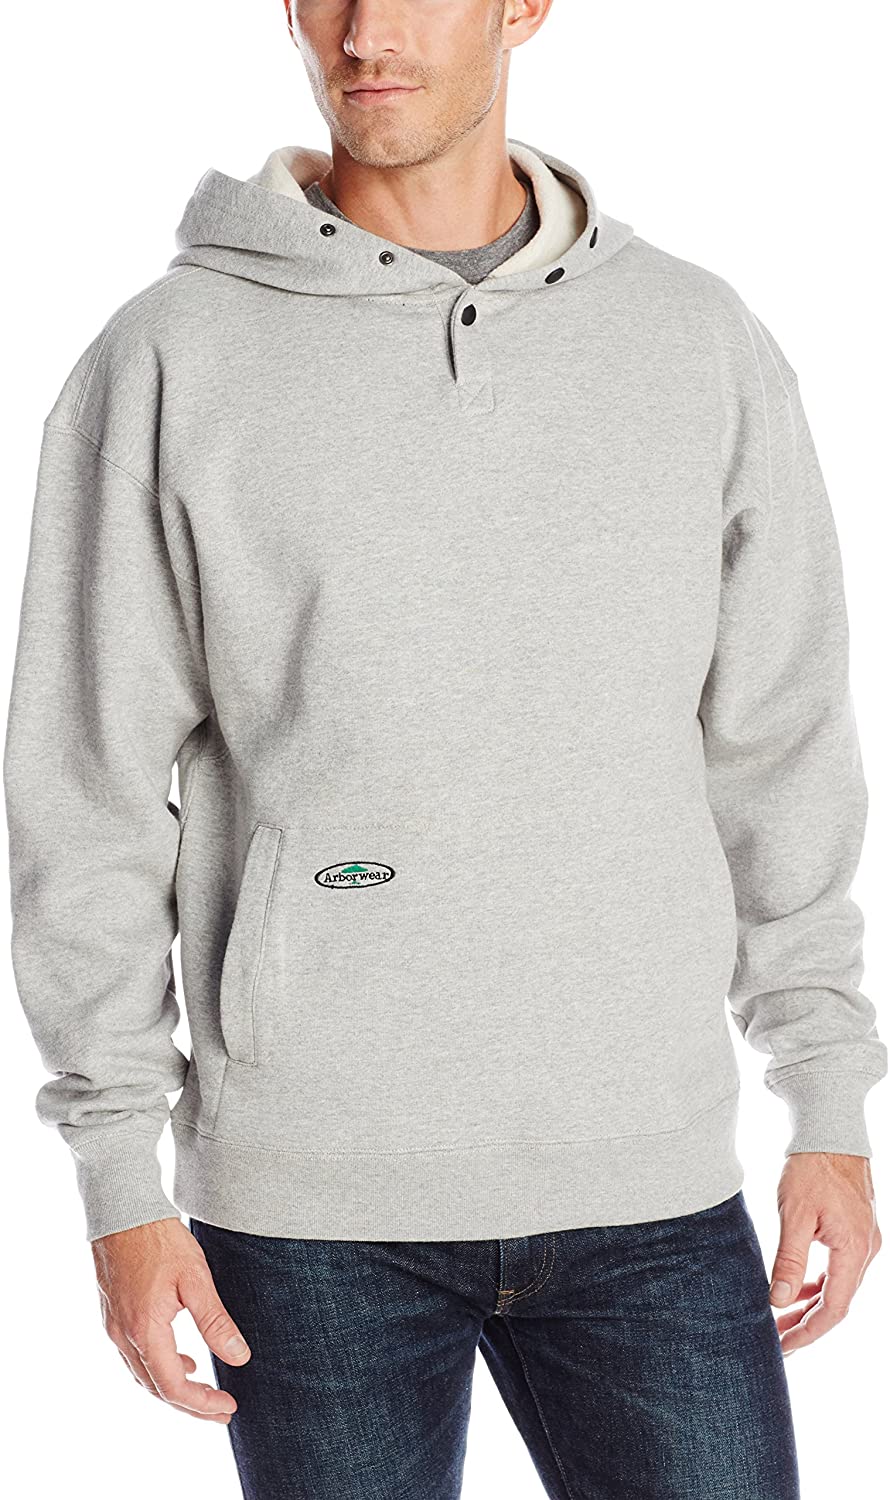 Arborwear Men's Single Thick Pullover Sweatshirt in Athletic Grey from the from